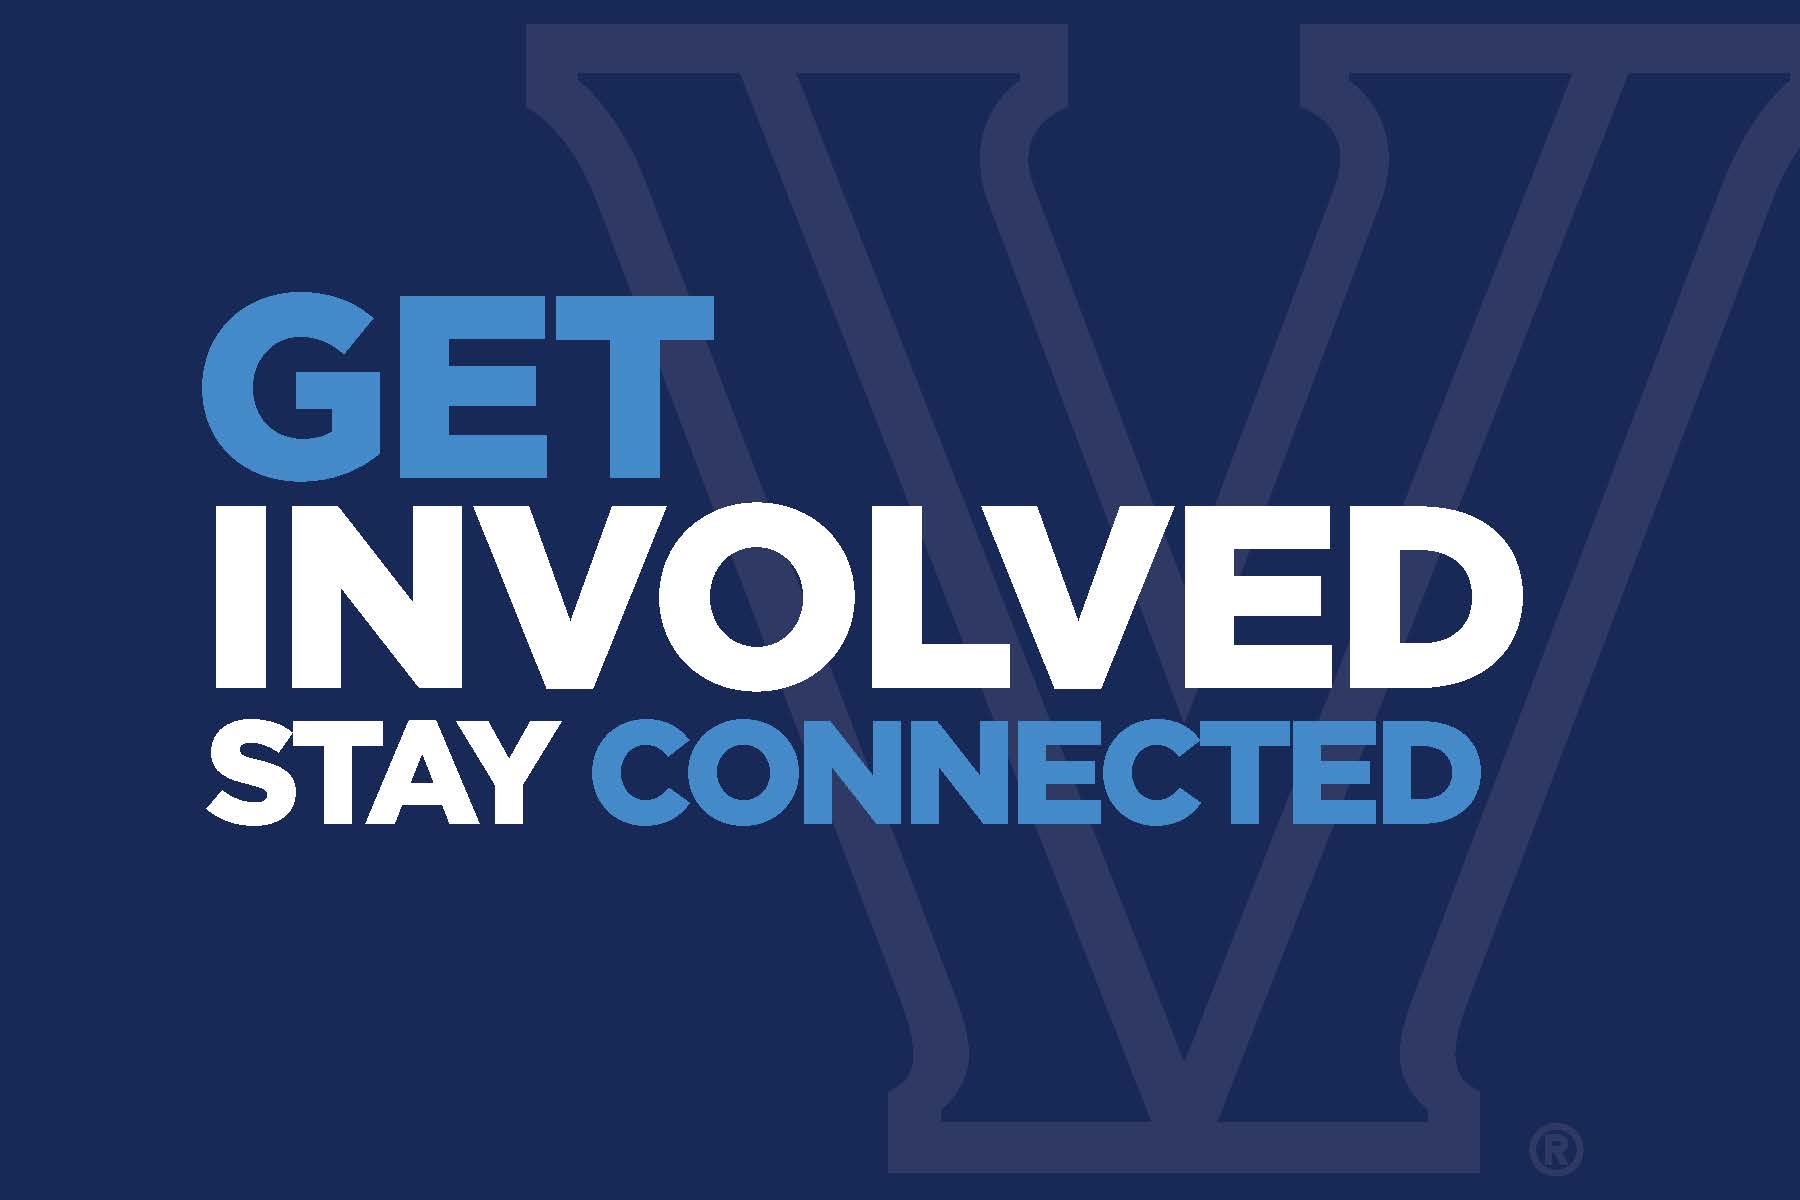 Villanova - Get Involved Stay Connected